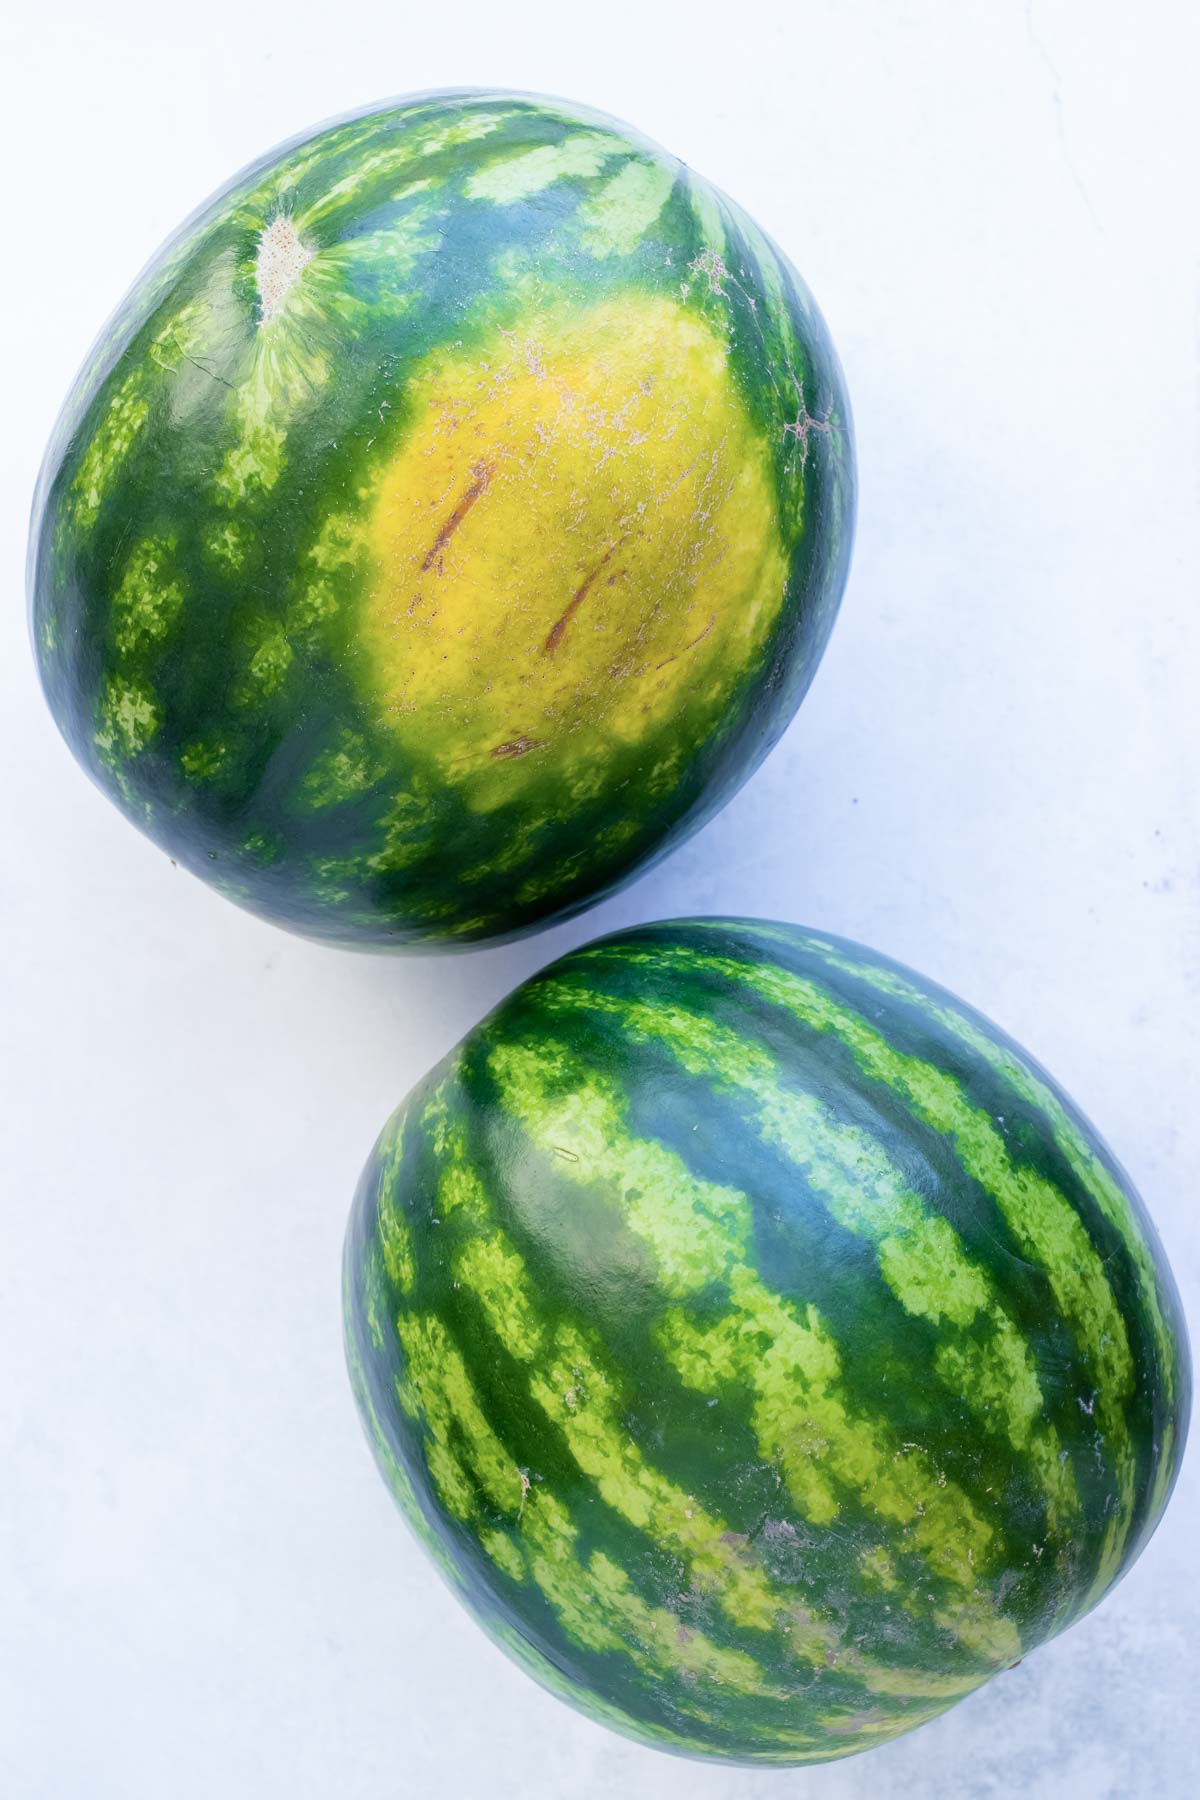 What to look for in a juicy, sweet watermelon.